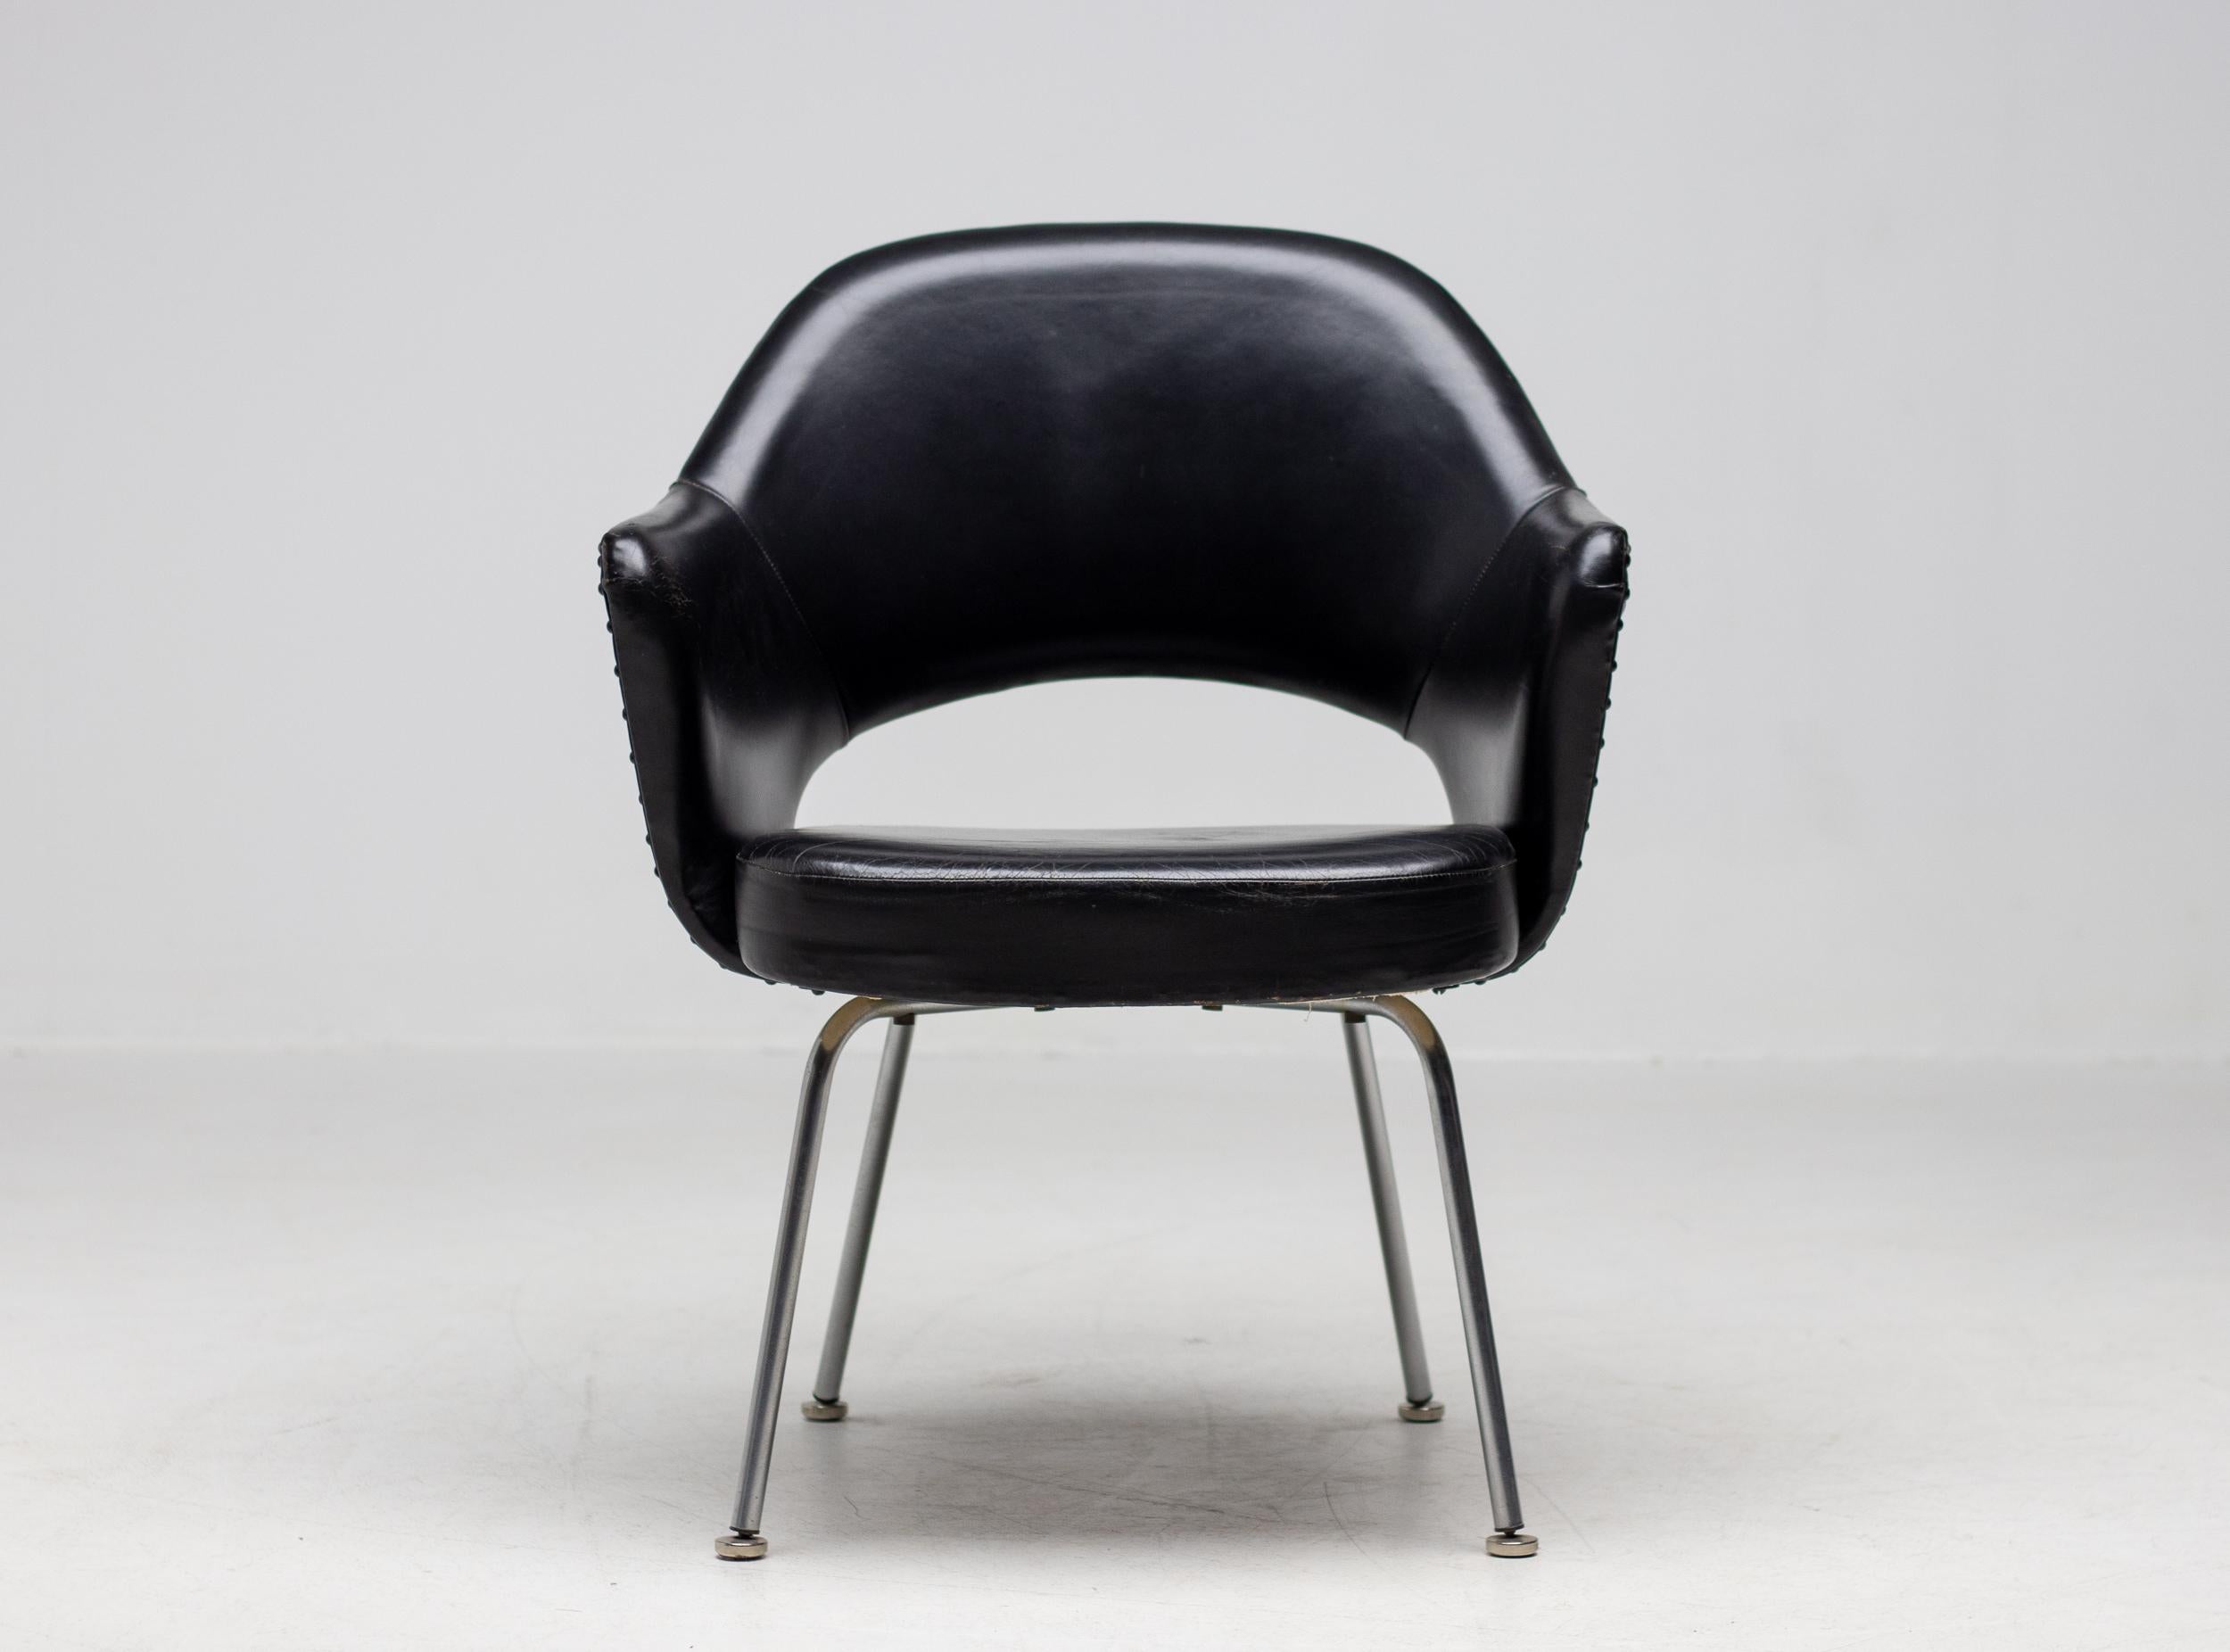 Featured in nearly all florence Knoll-designed interiors, the saarinen executive chair has remained one of Knoll's most popular designs for nearly 70 years. The design, which is now found in dining rooms as often as it is in offices, transformed the